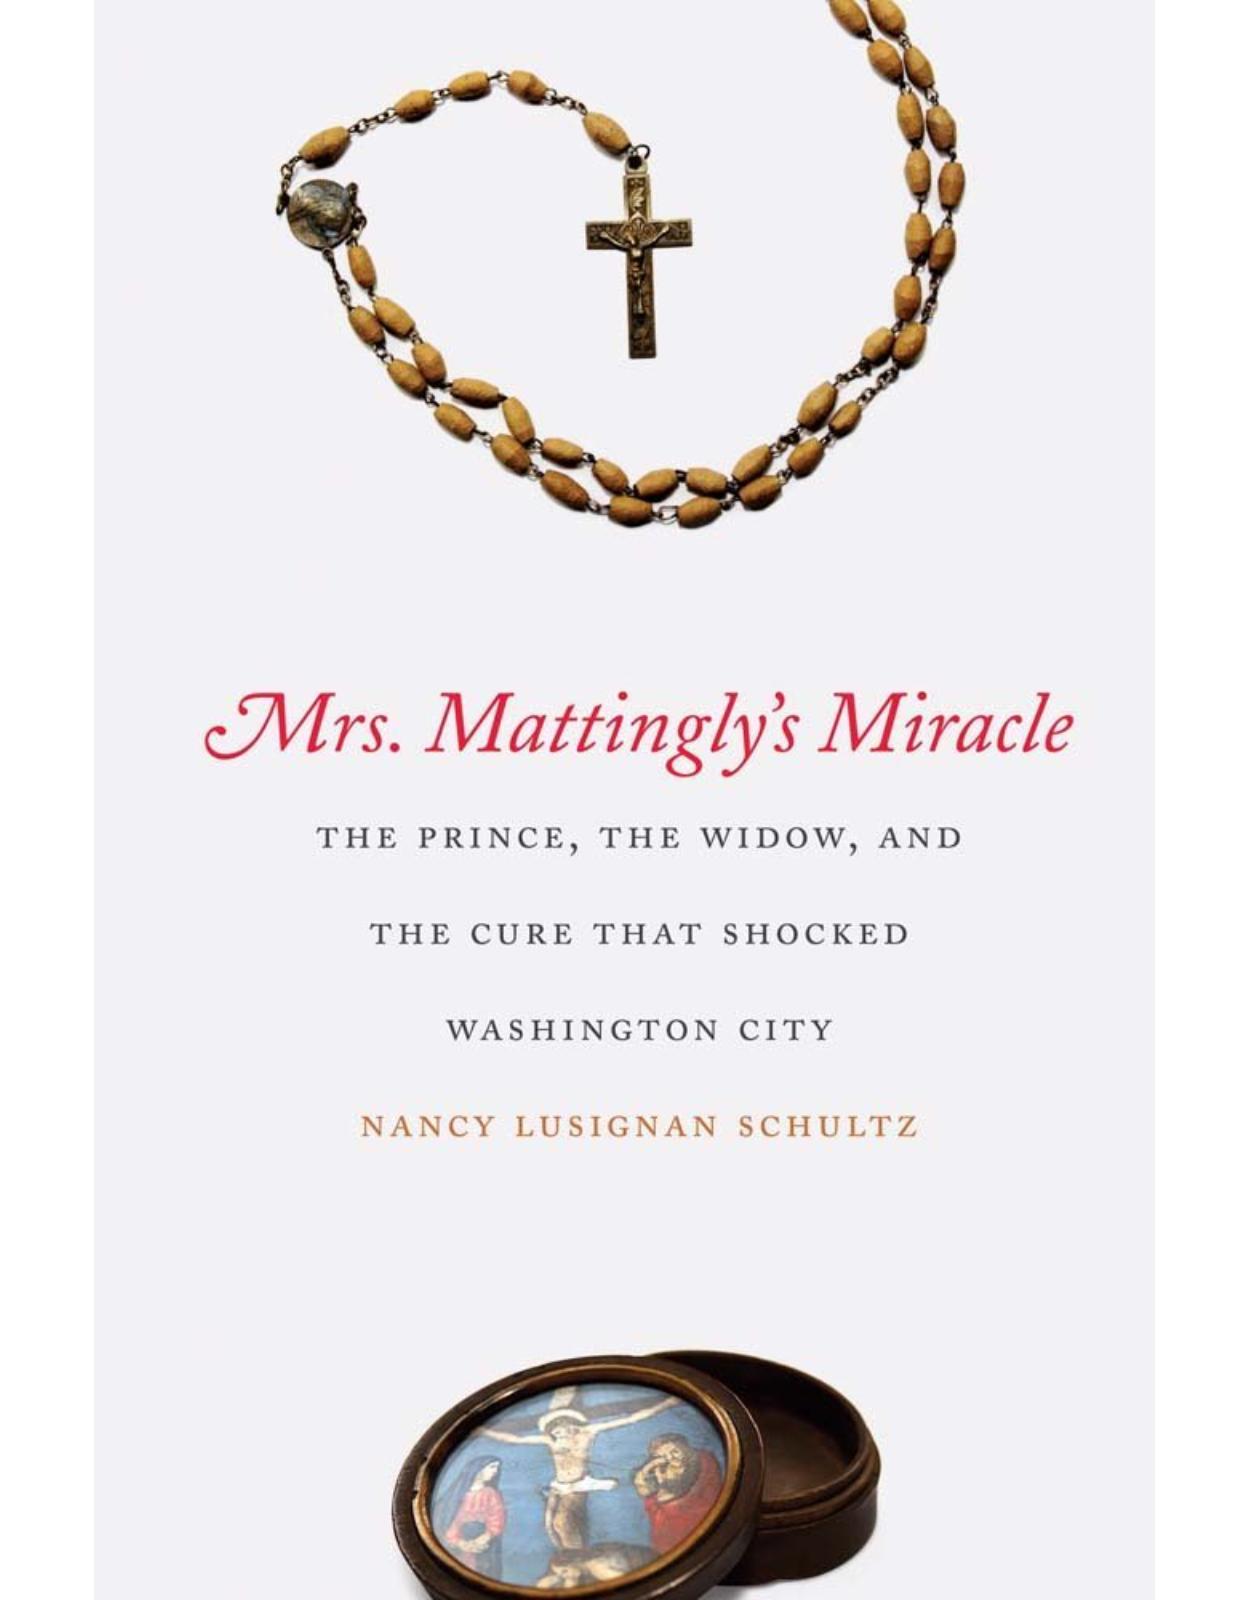 Mrs. Mattingly's Miracle. The Prince, the Widow, and the Cure that Shocked Washington City